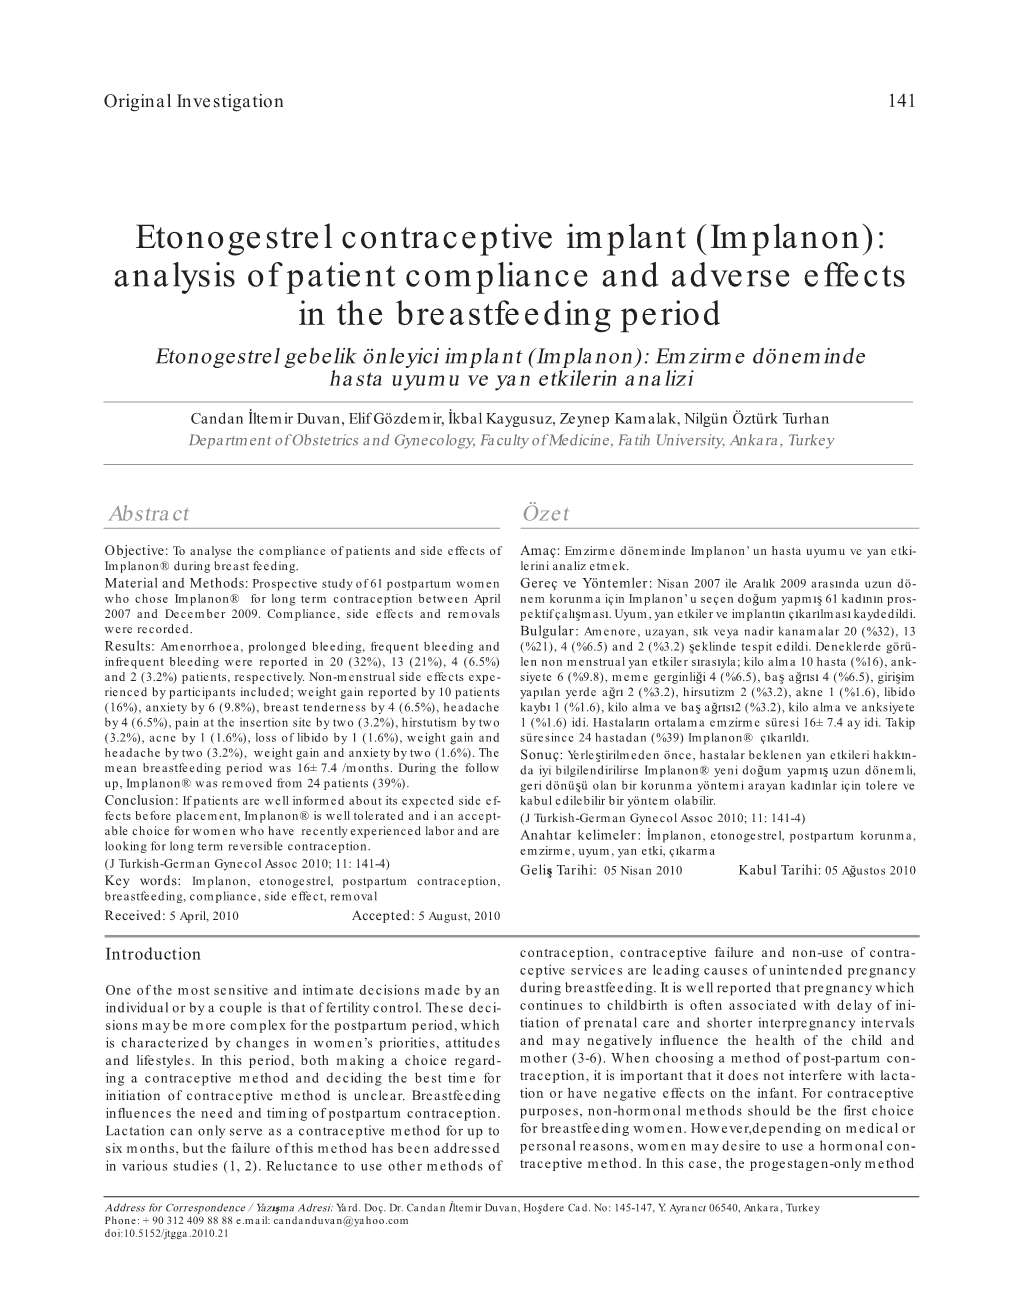 Etonogestrel Contraceptive Implant (Implanon): Analysis of Patient Compliance and Adverse Effects in the Breastfeeding Period